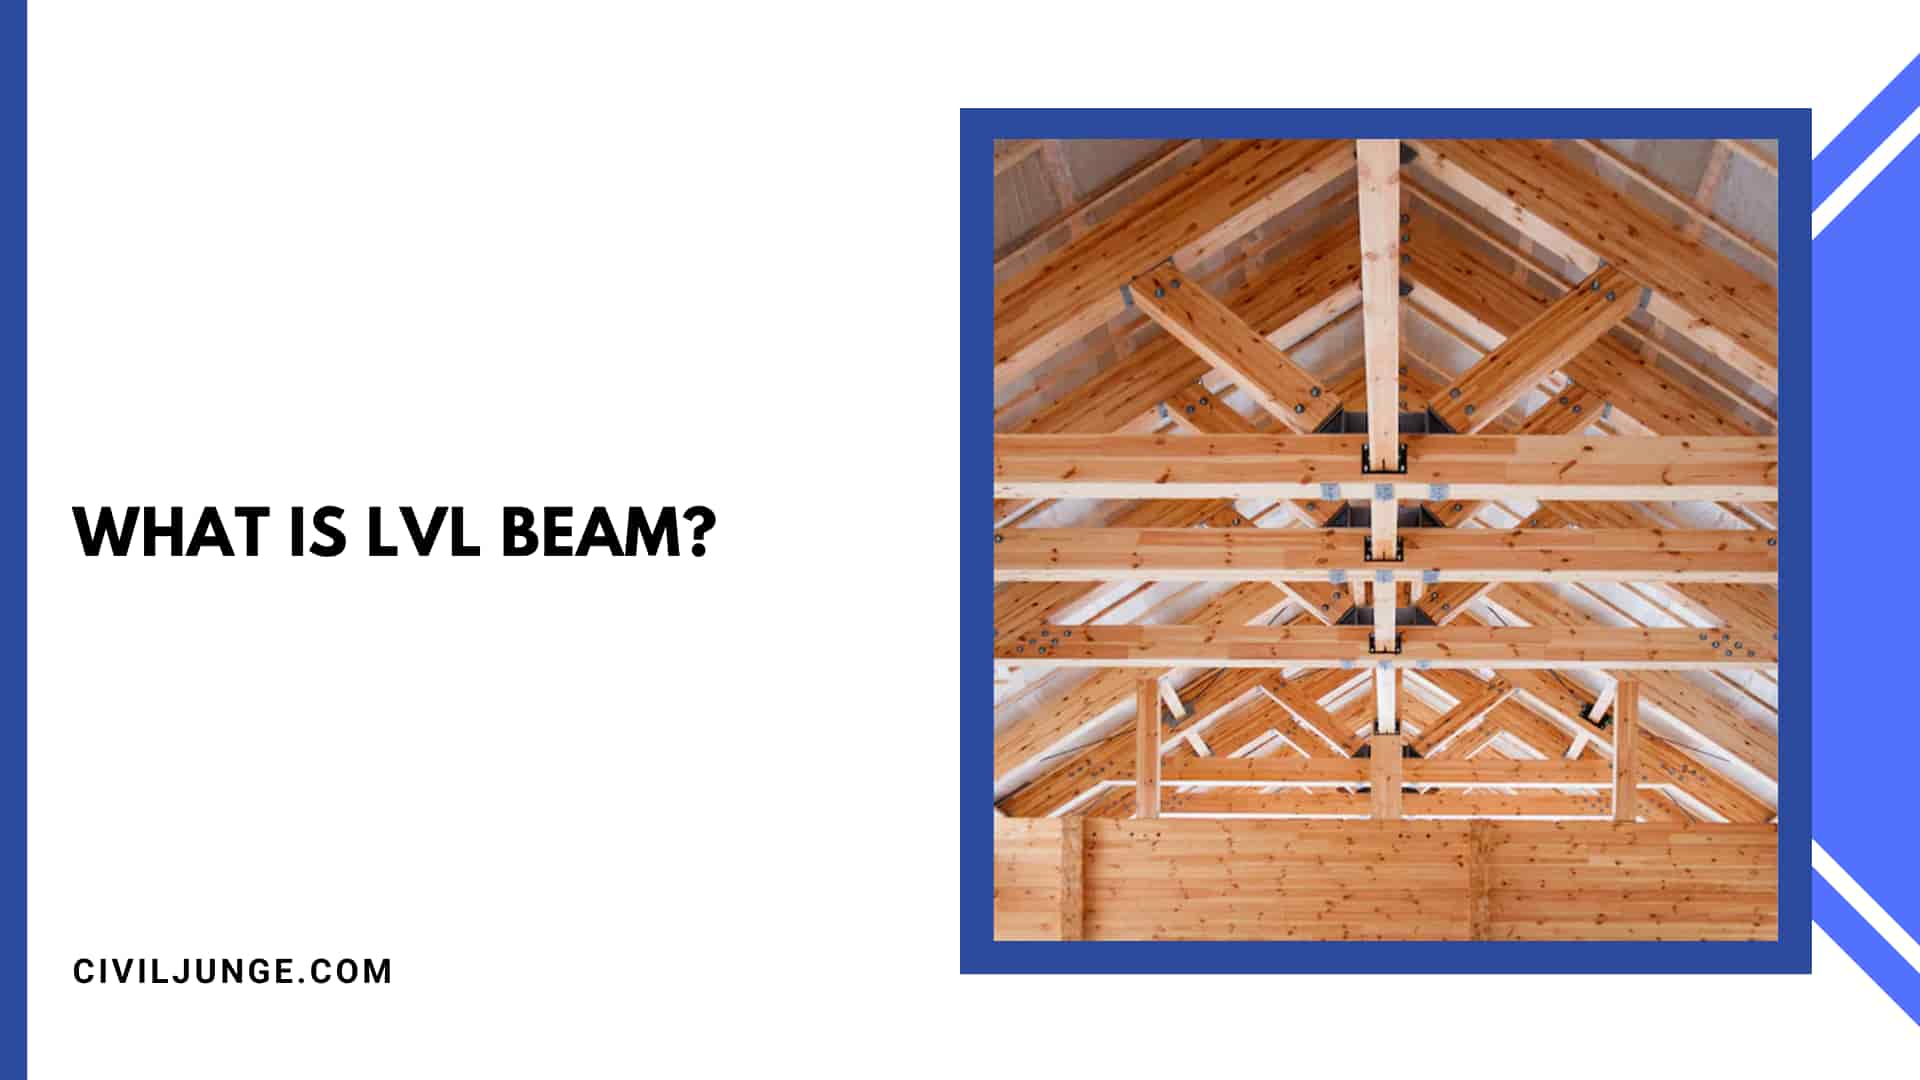 What Is Lvl Beam?